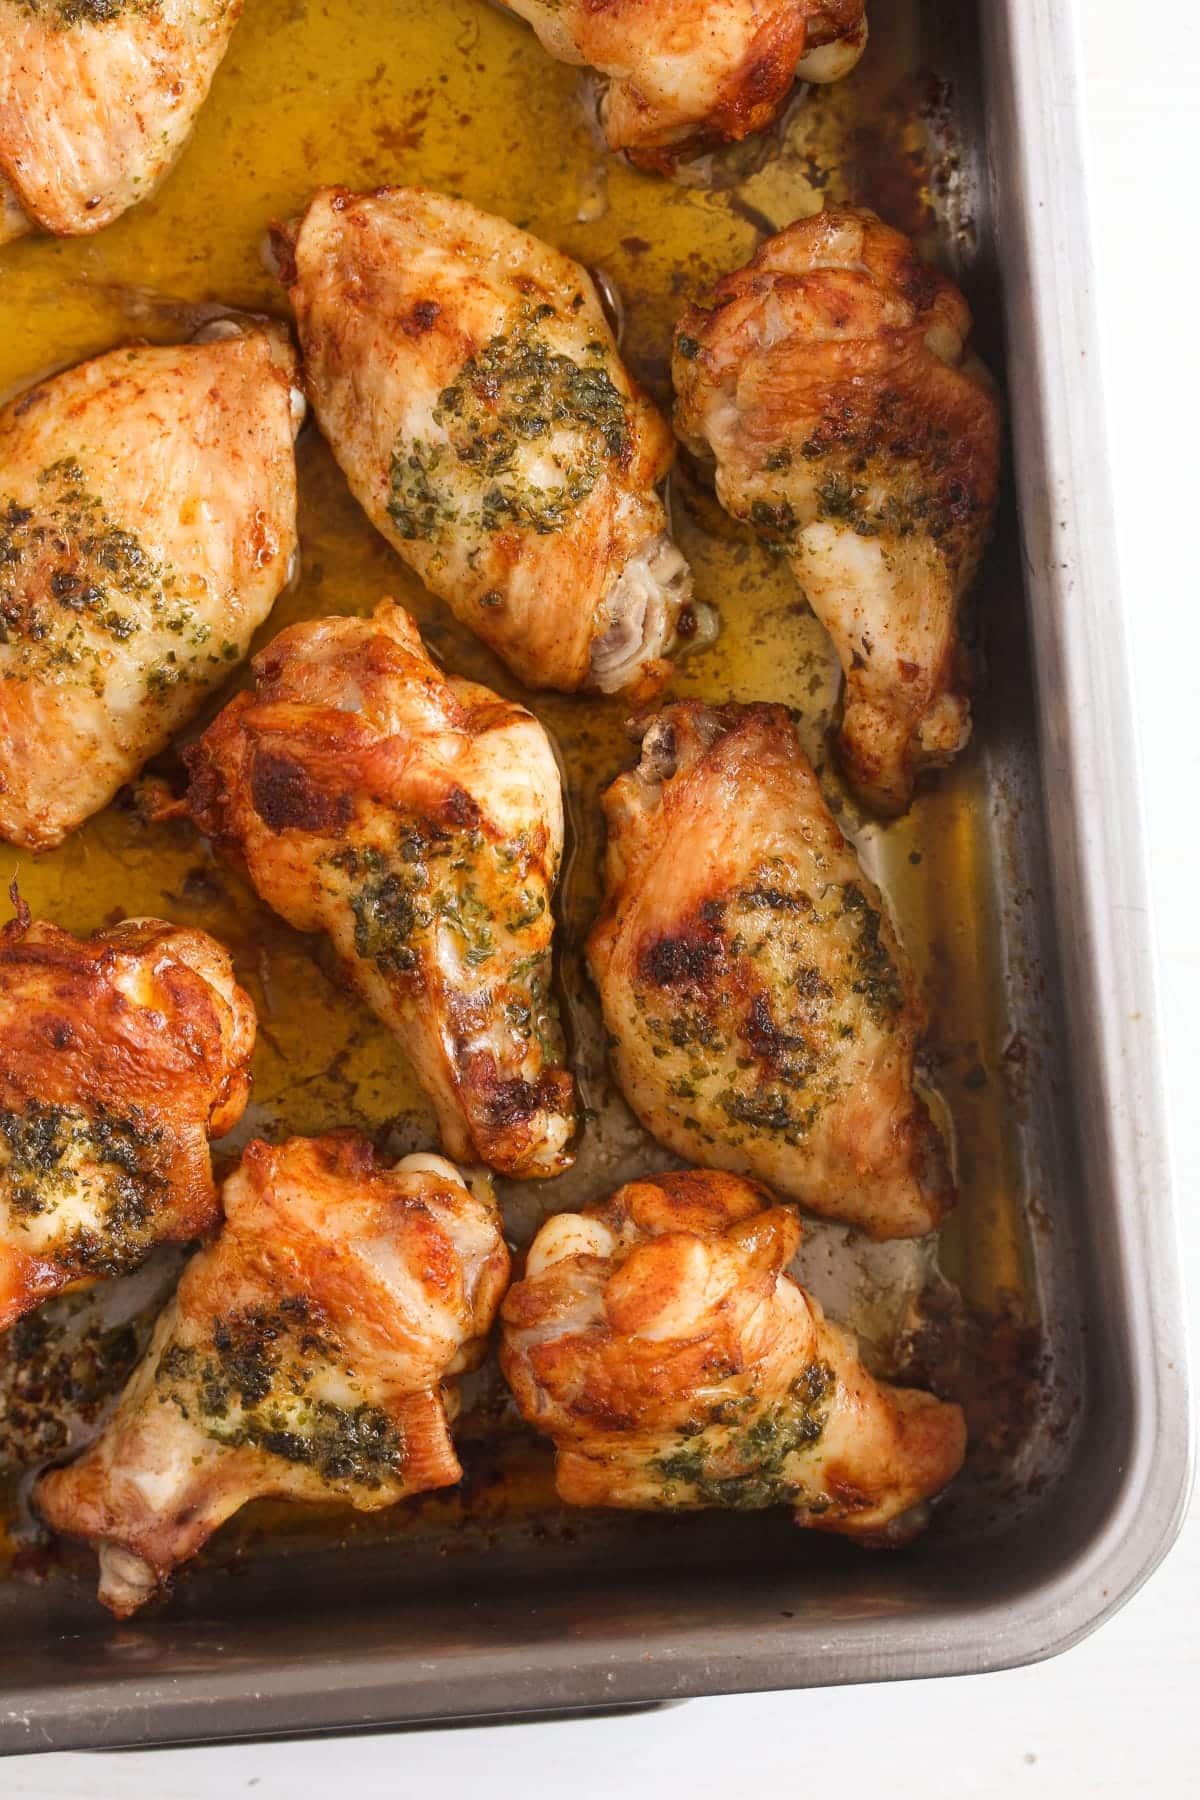 many golden roasted buttered wings in a baking dish.